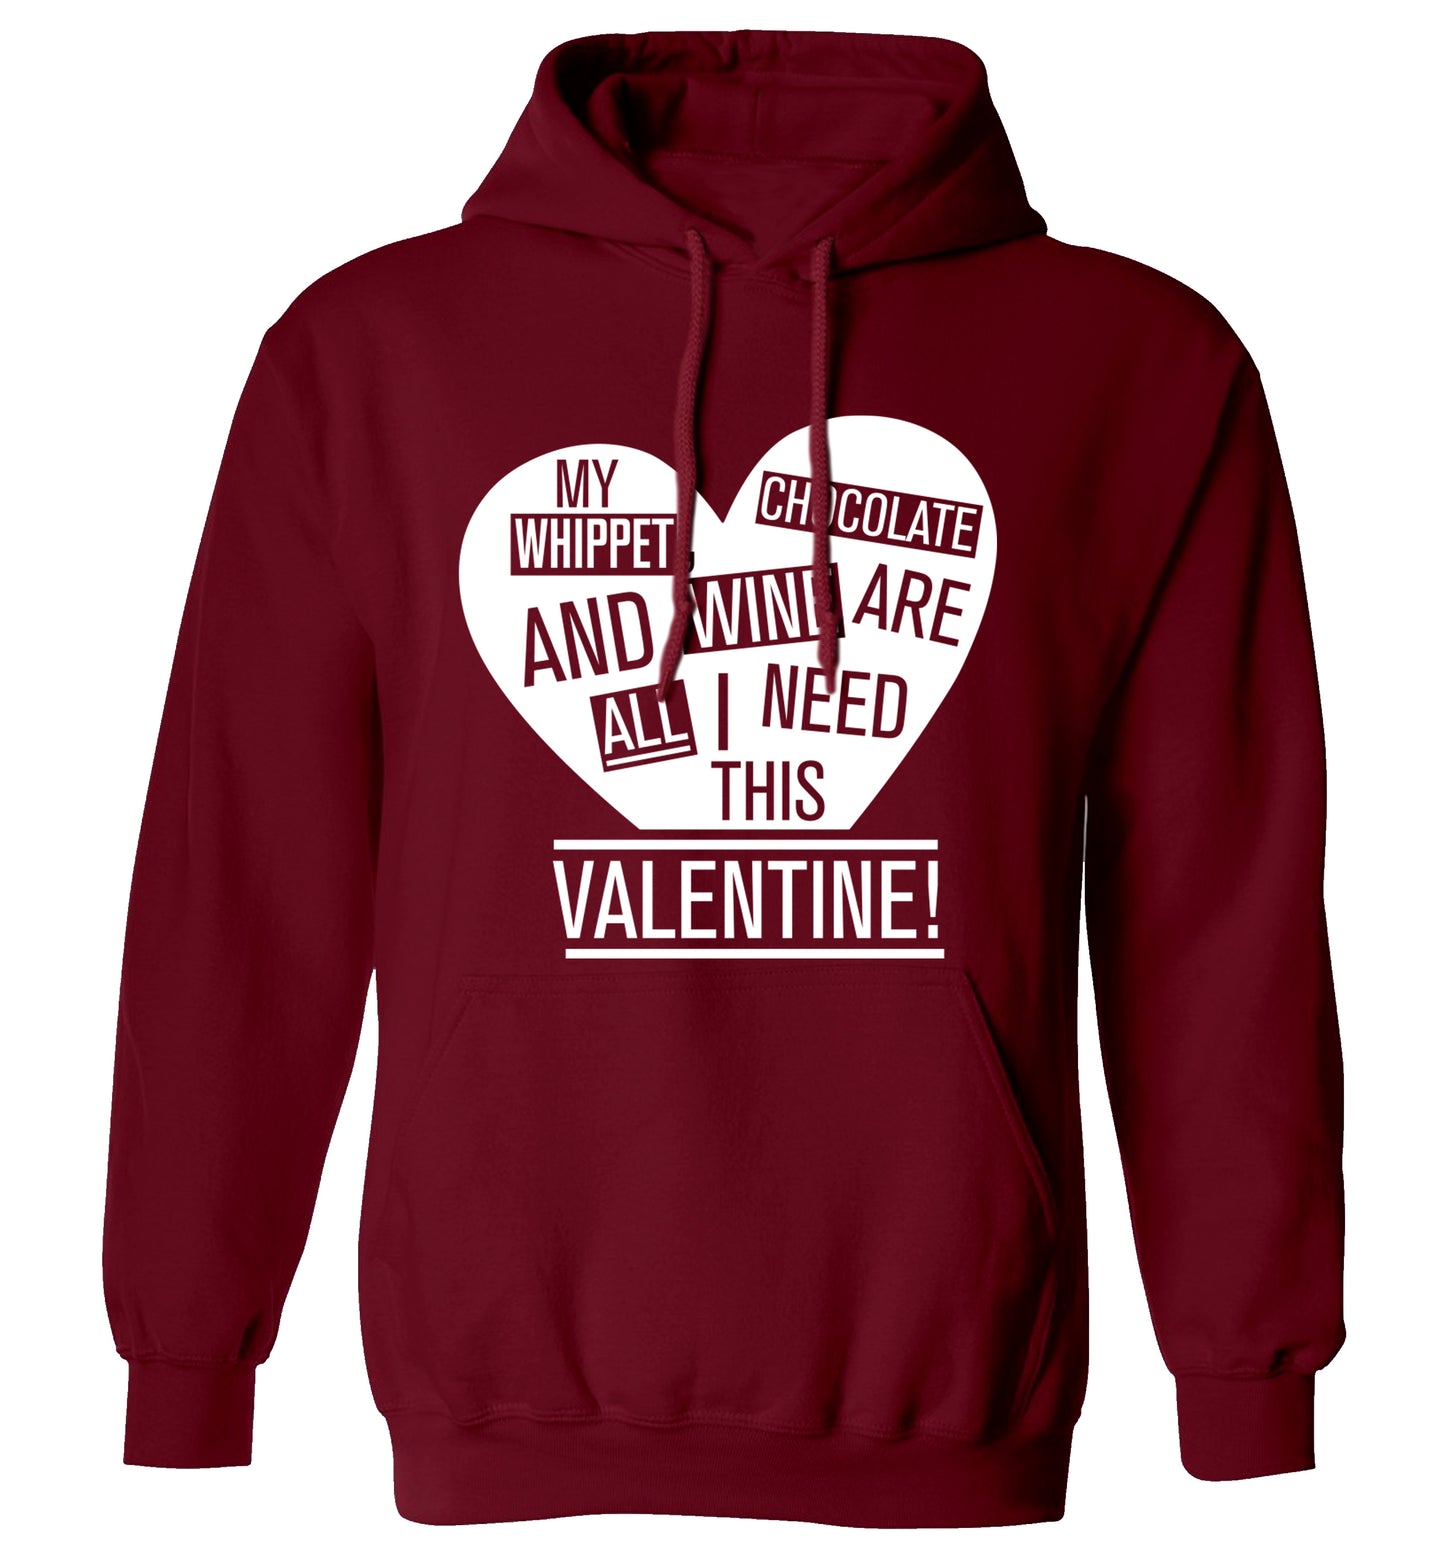 My whippet, chocolate and wine are all I need this valentine! adults unisex maroon hoodie 2XL